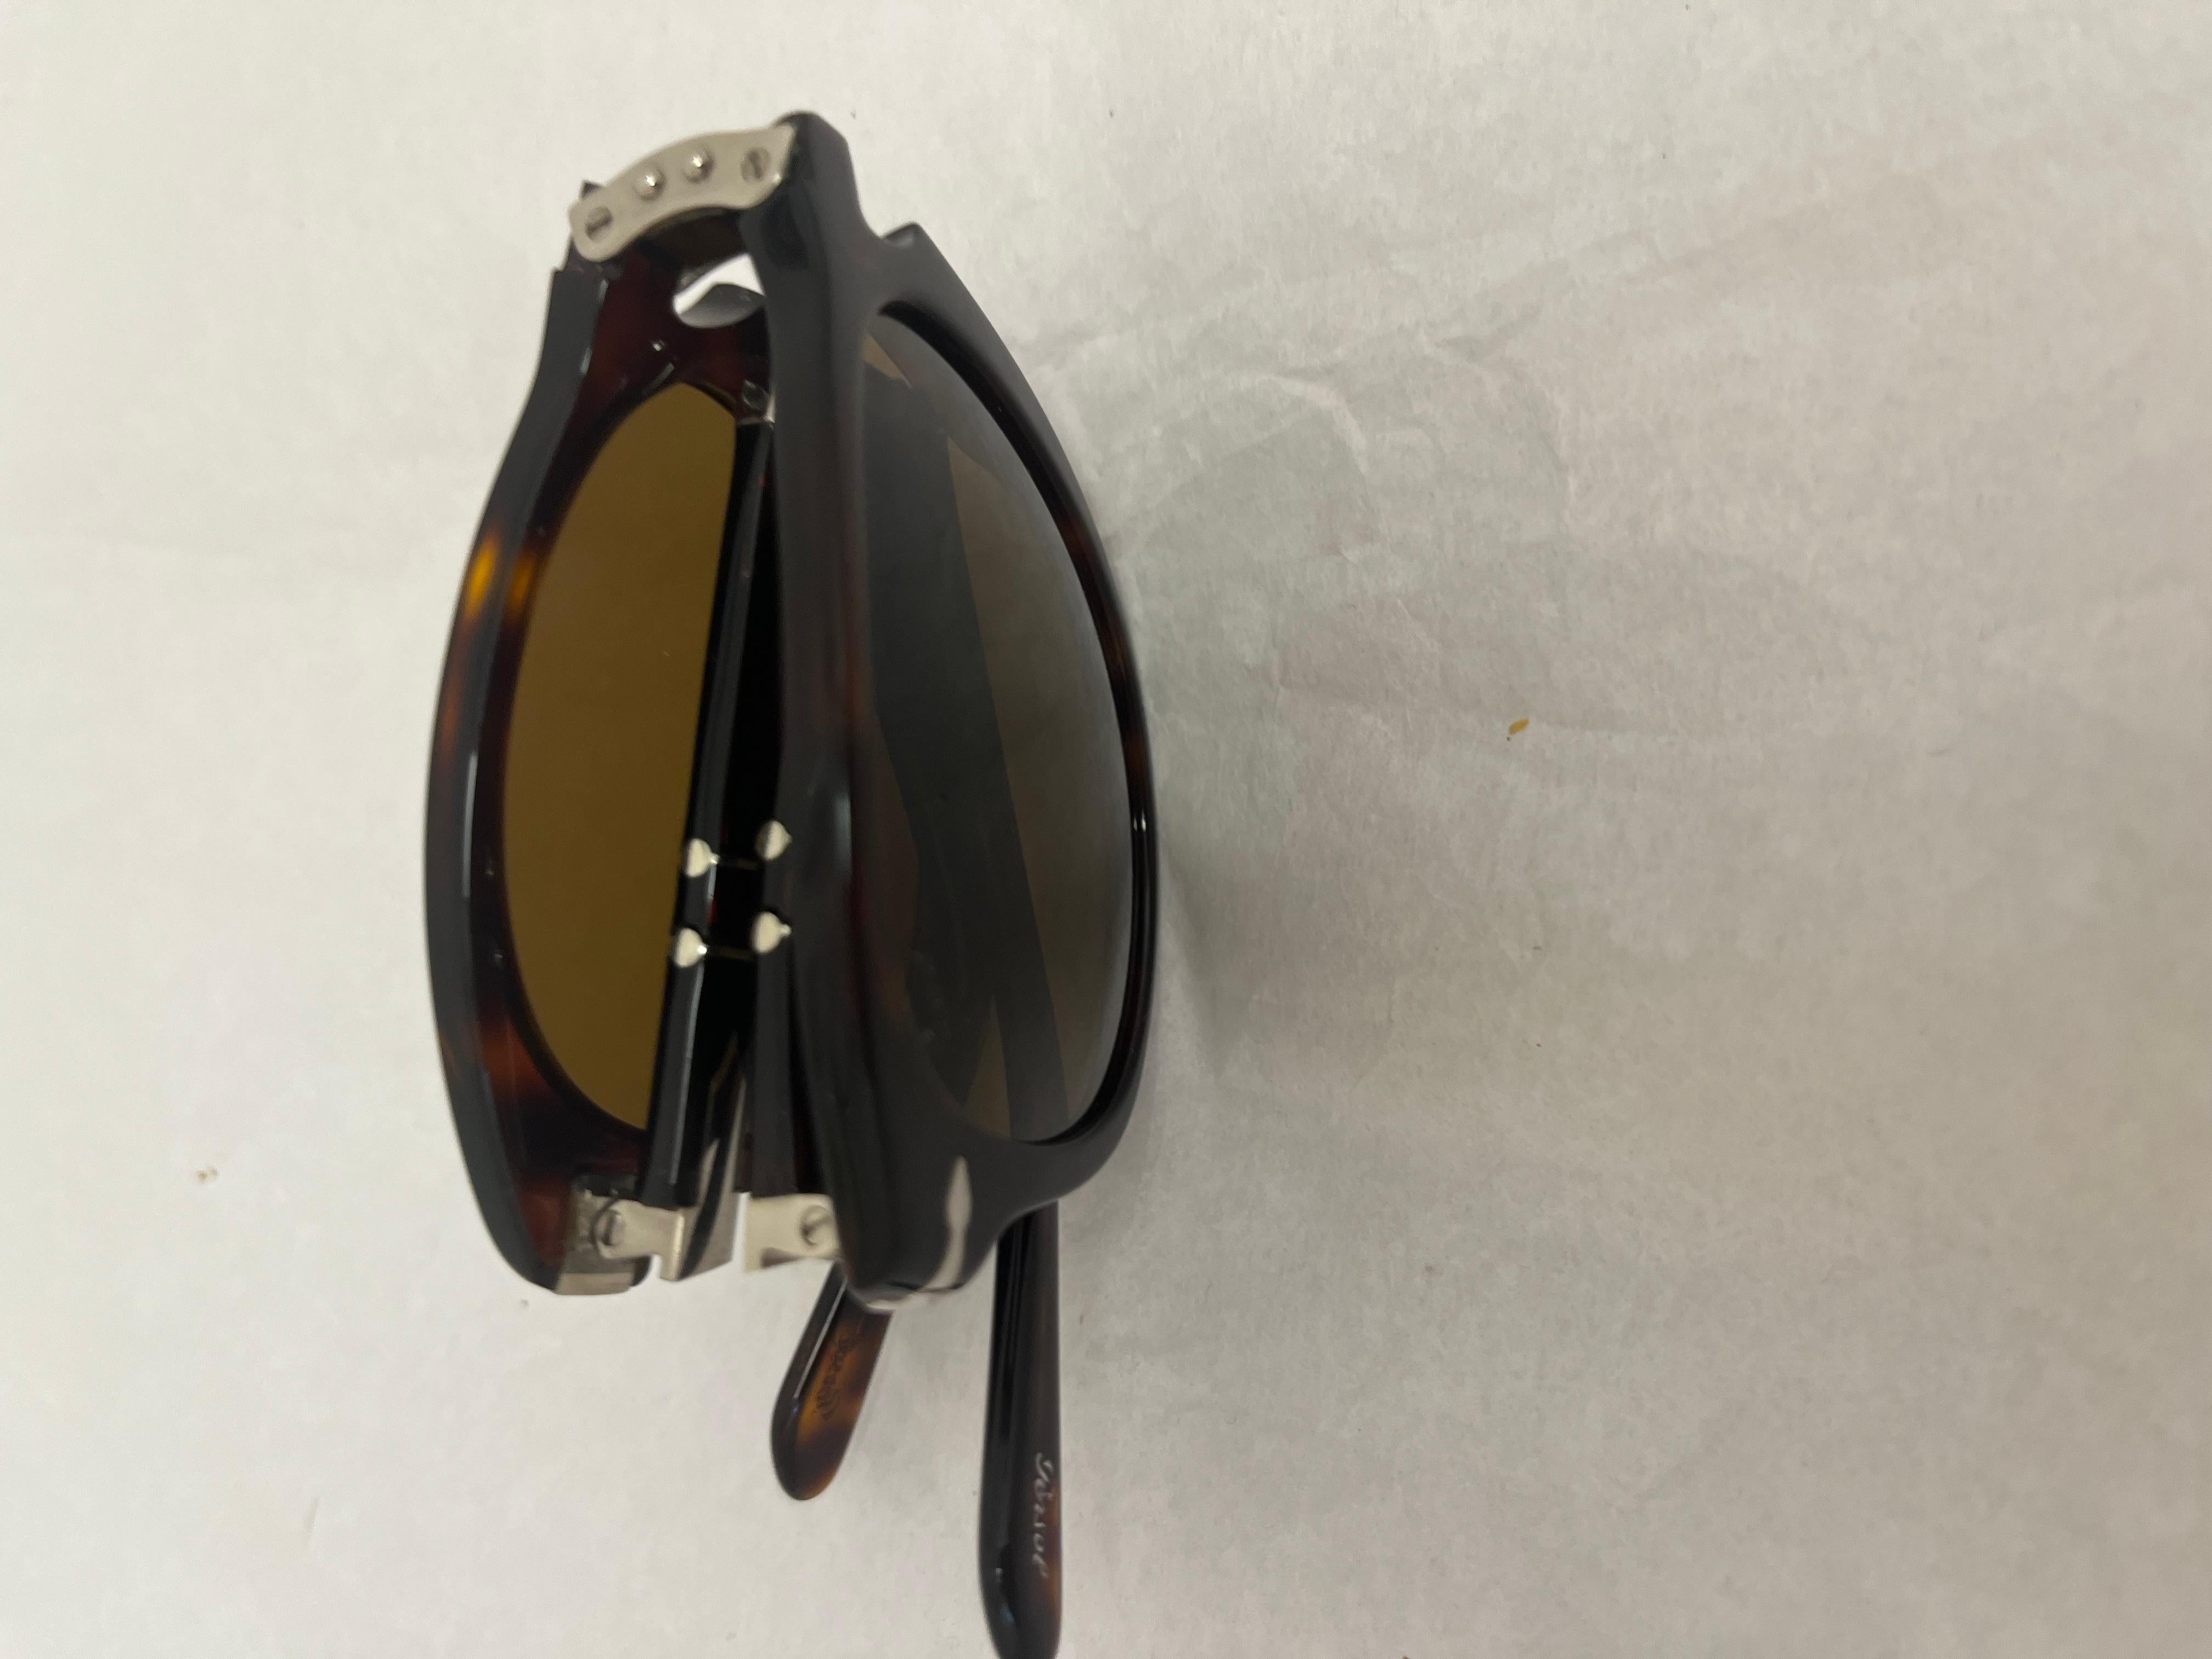 So practical! These Persol folding sunglasses are half the size of normal sunglasses and can even be put in your pocket.
The frame are plastic and the color is Havana. The lens are brown and the size is 52. 
They offer complete UV protection.
Persol